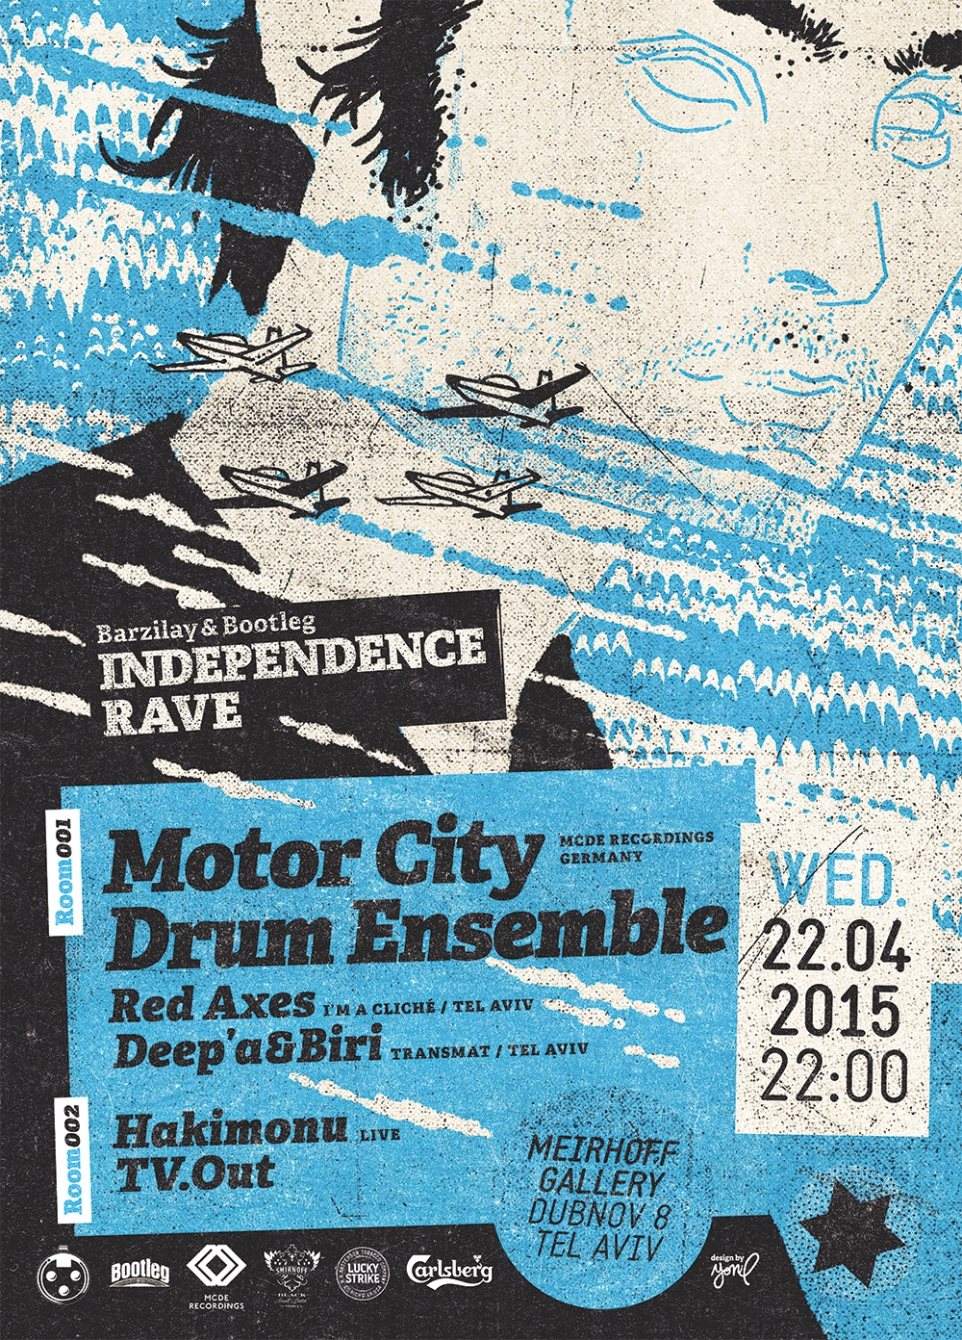 Barzilay & Bootleg Independence Rave with Motor City Drum Ensemble - フライヤー表